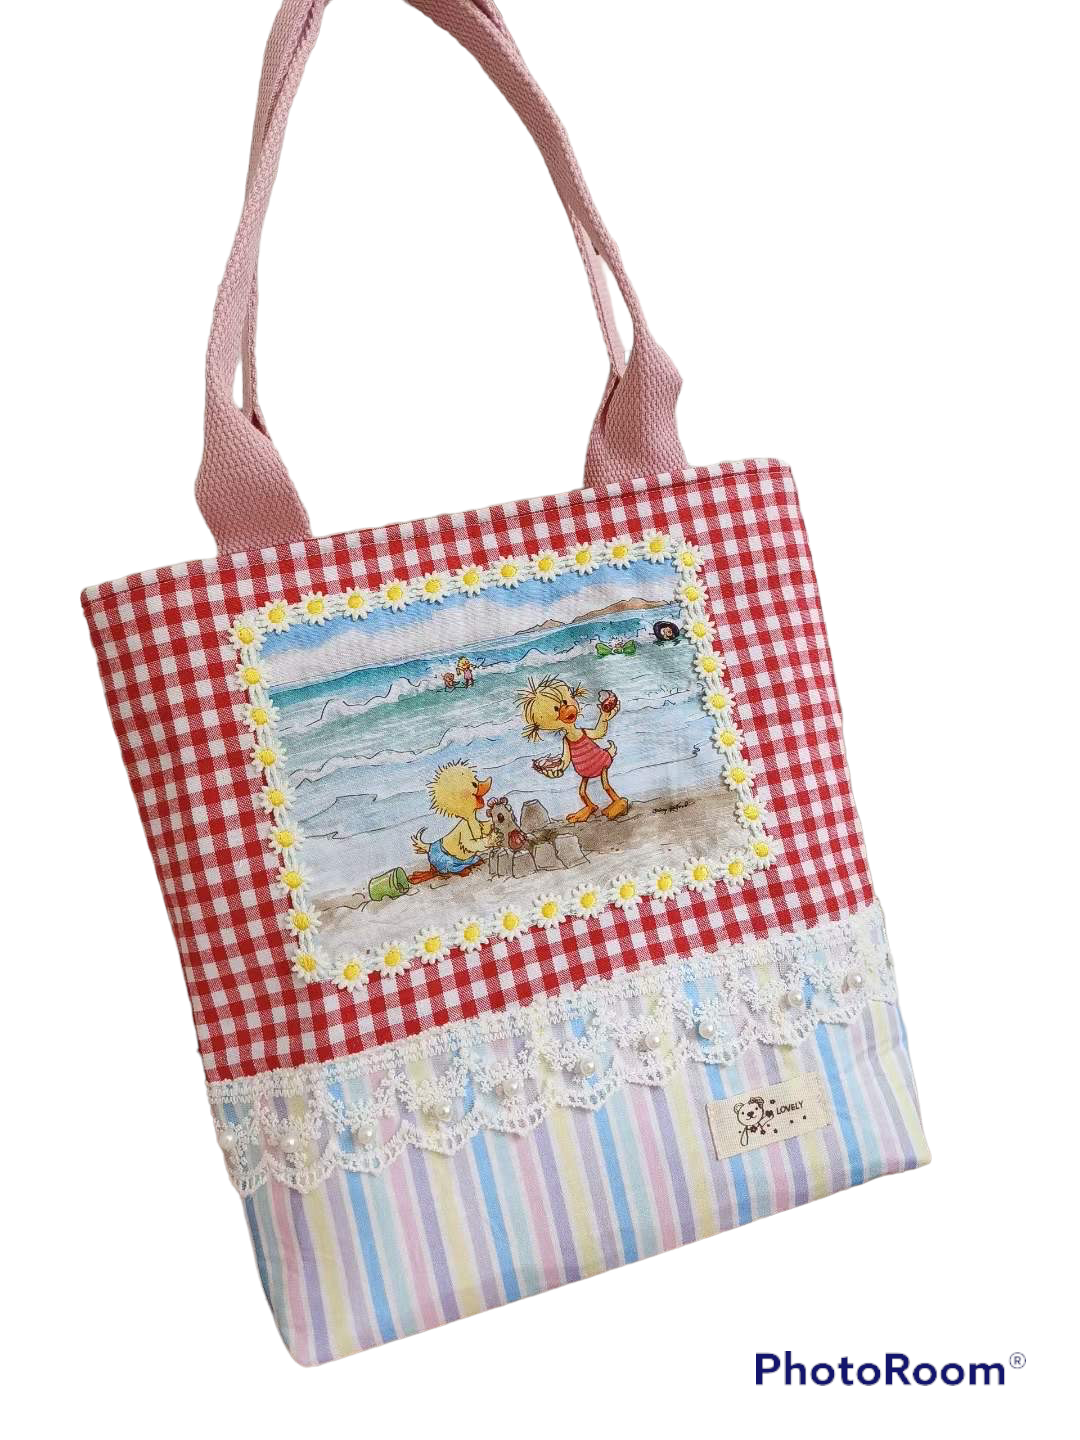 Duck friends print lace frilly handmade bag